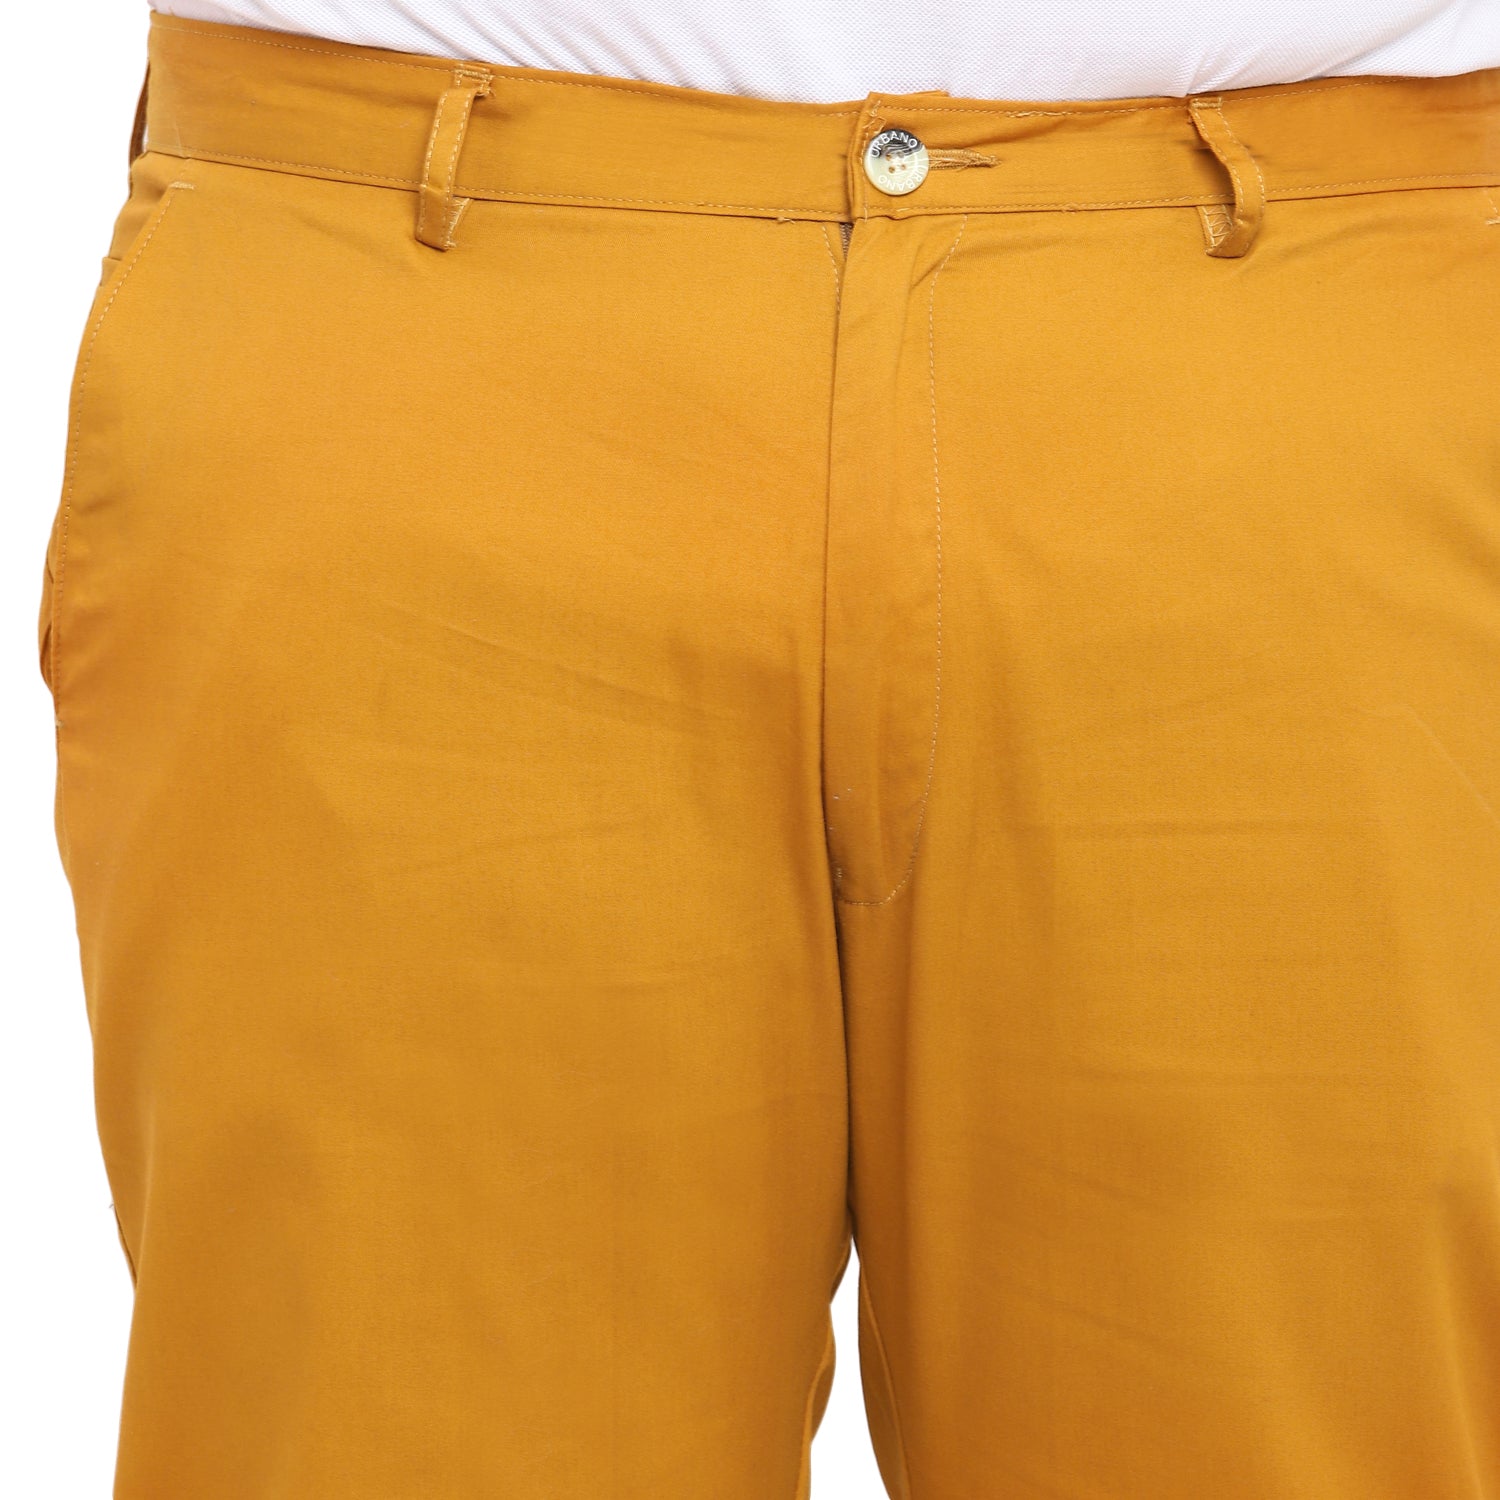 Plus Men's Yellow Cotton Light Weight Non-Stretch Regular Fit Casual Trousers